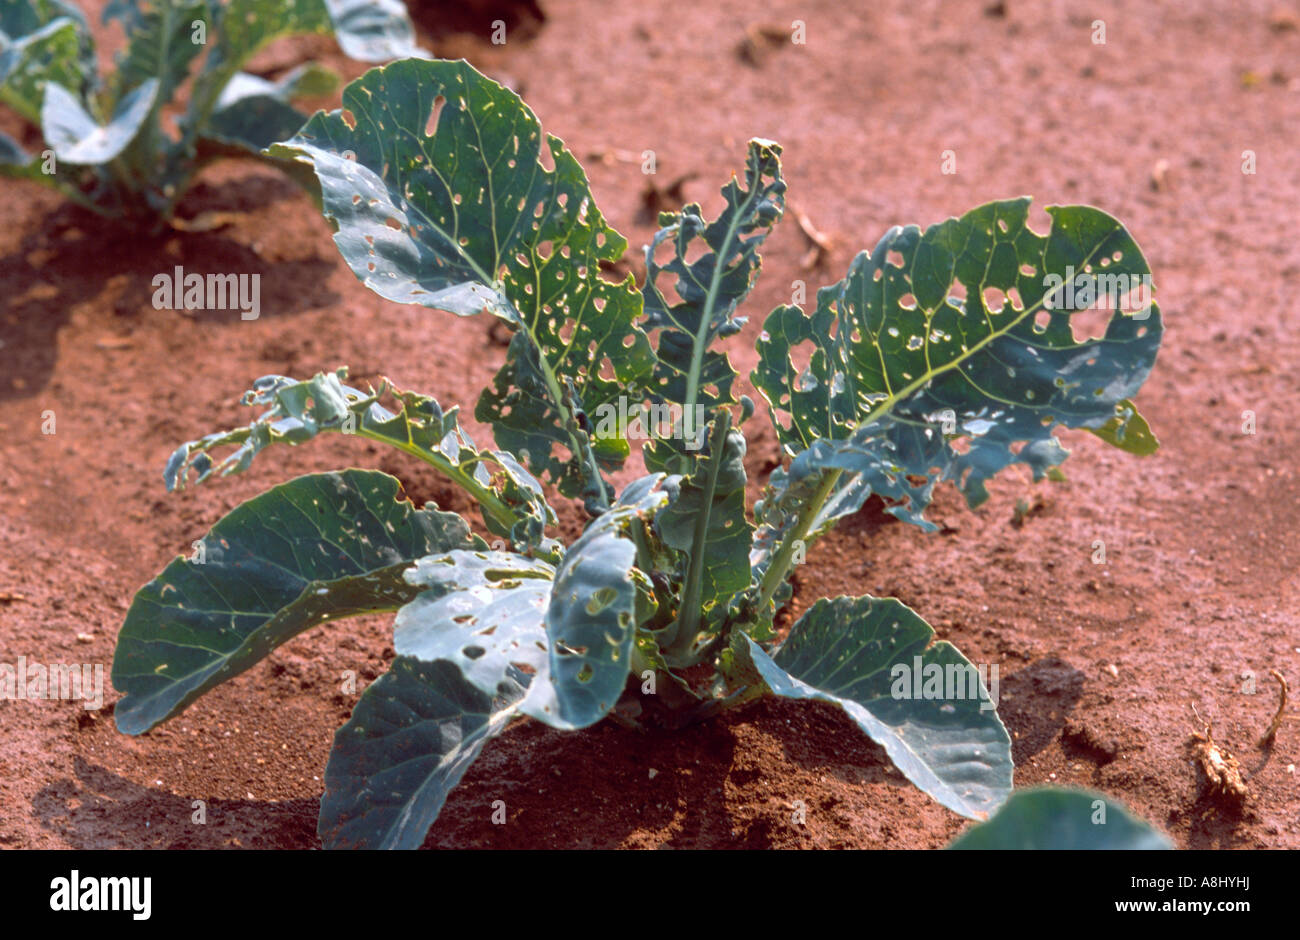 Broccoli plant damaged by the caterpillar pest cabbage moth Stock Photo